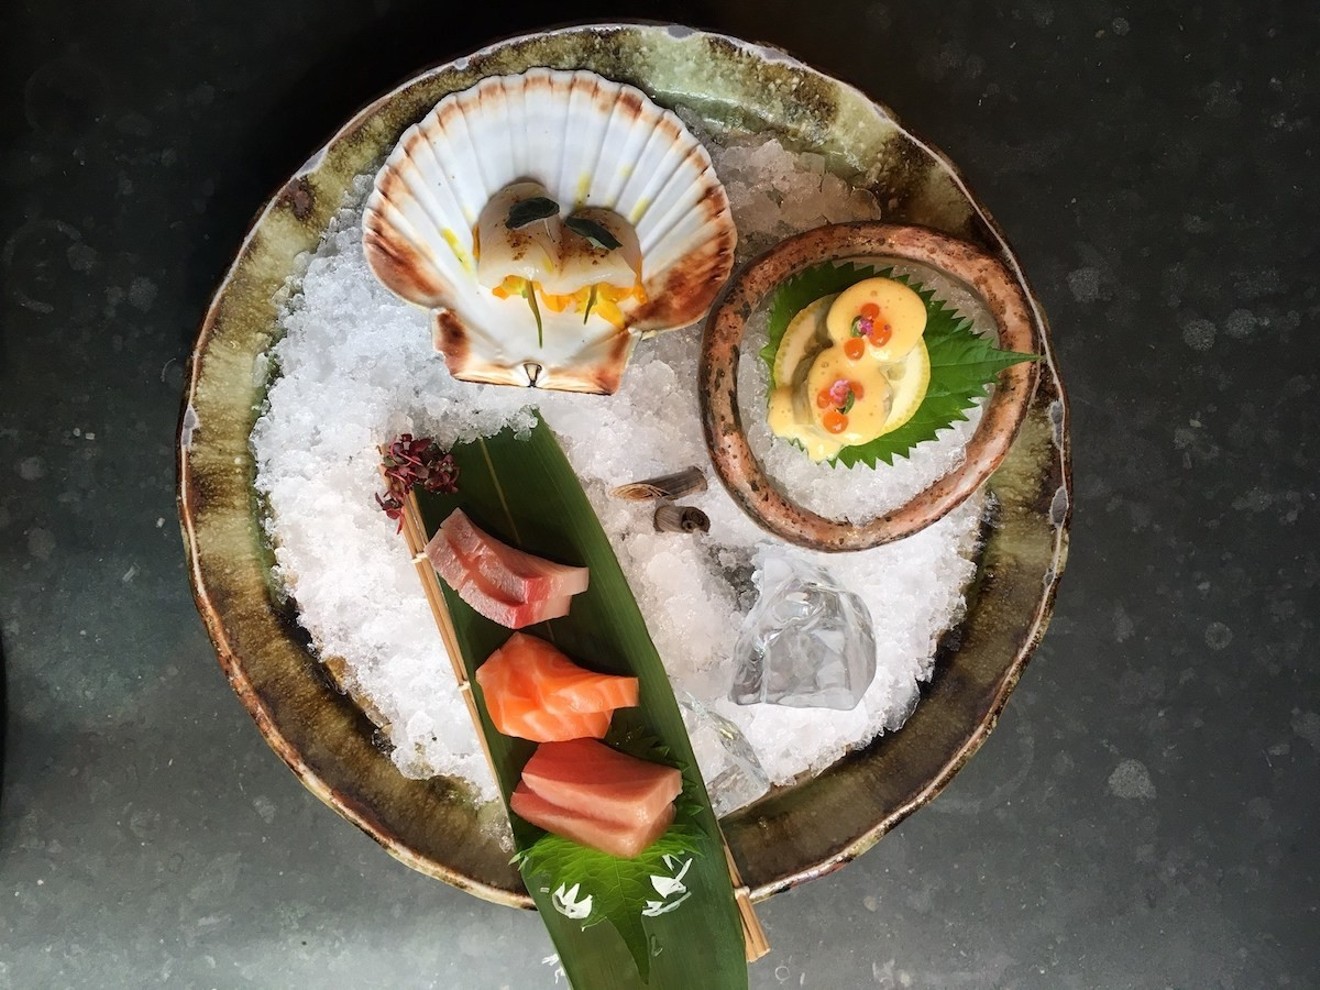 Expect to find creative sushi and sashimi like this Roka London dish when Etaru opens in Hallandale Beach later this year.